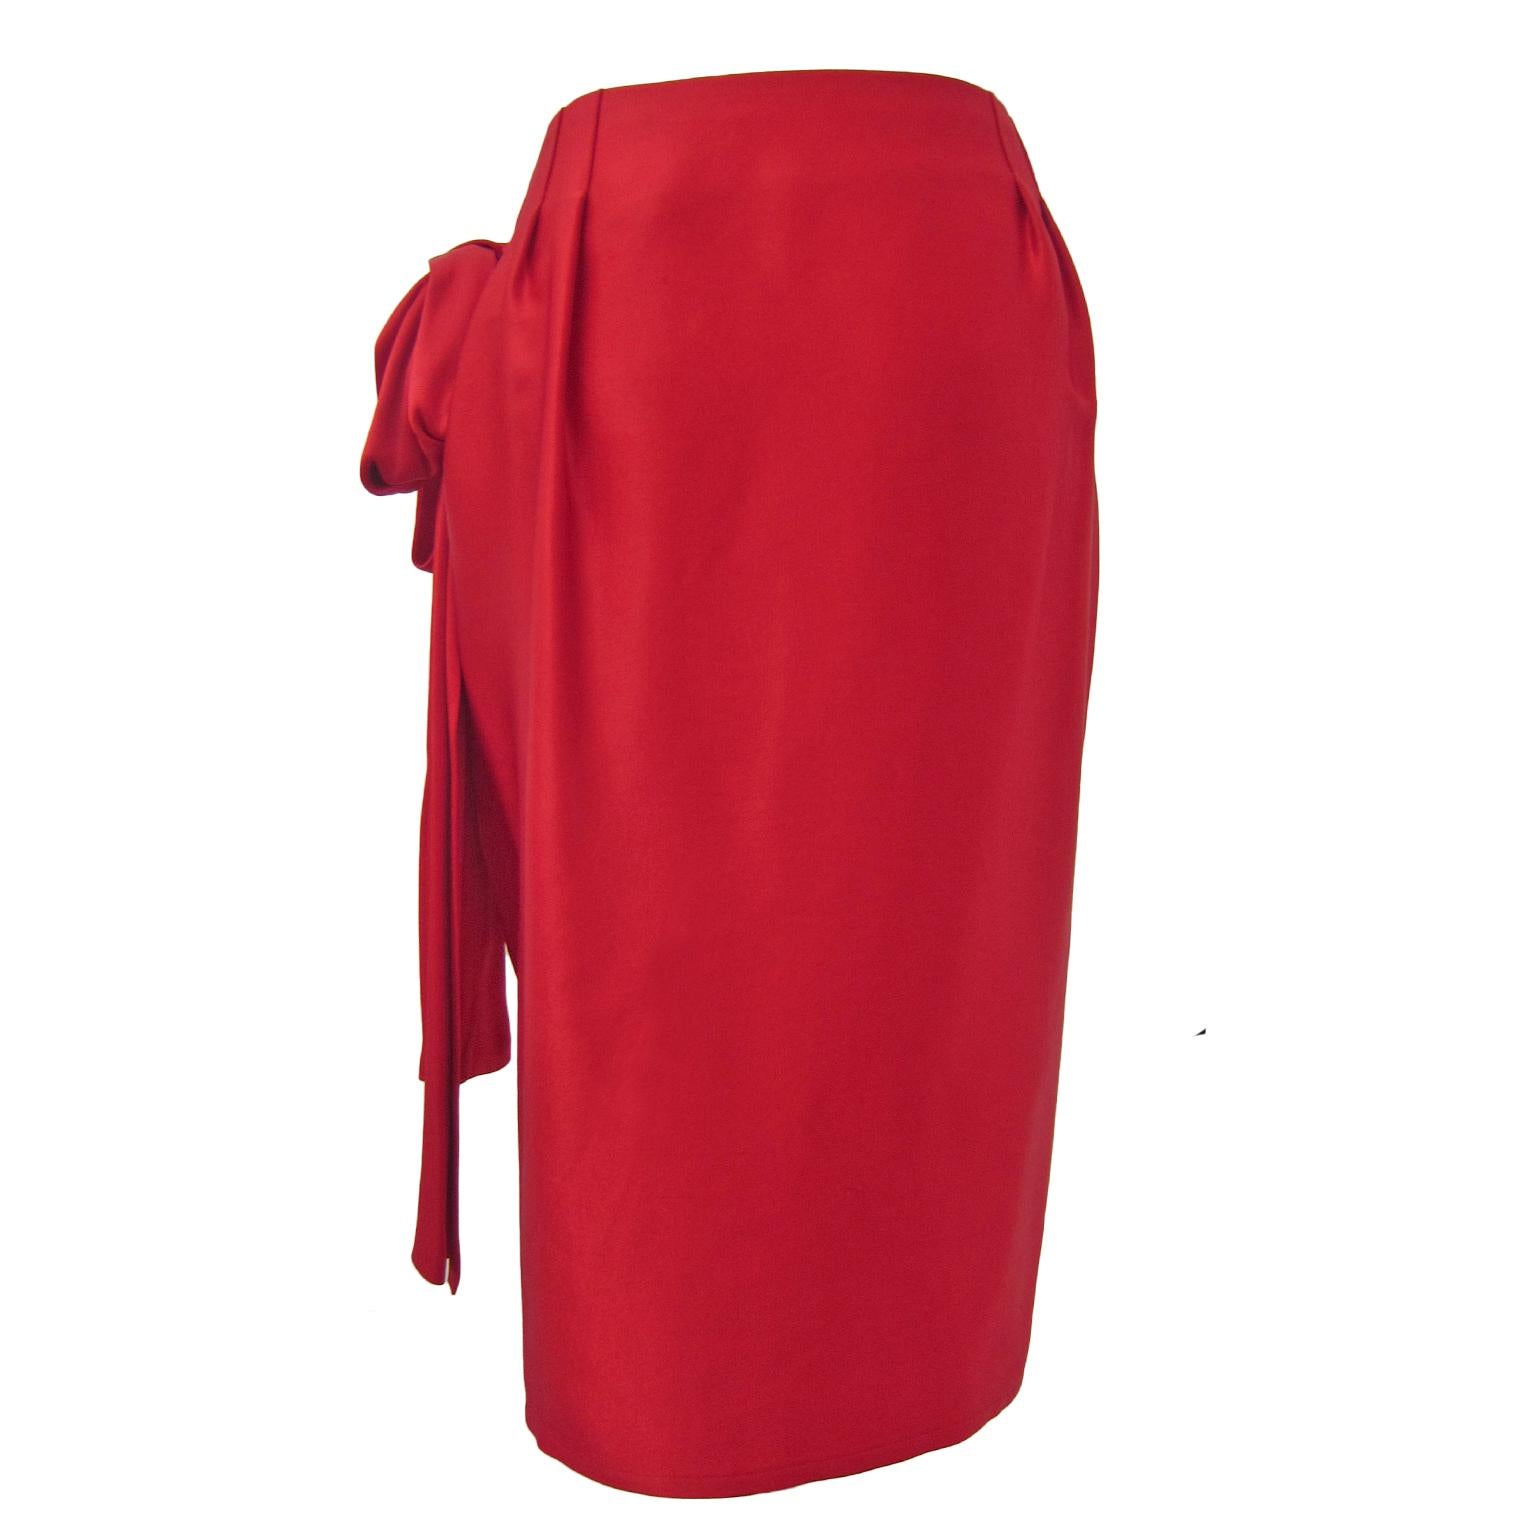 YSL Rive Gauche Royal Red Satin Skirt With Bow 1985 1